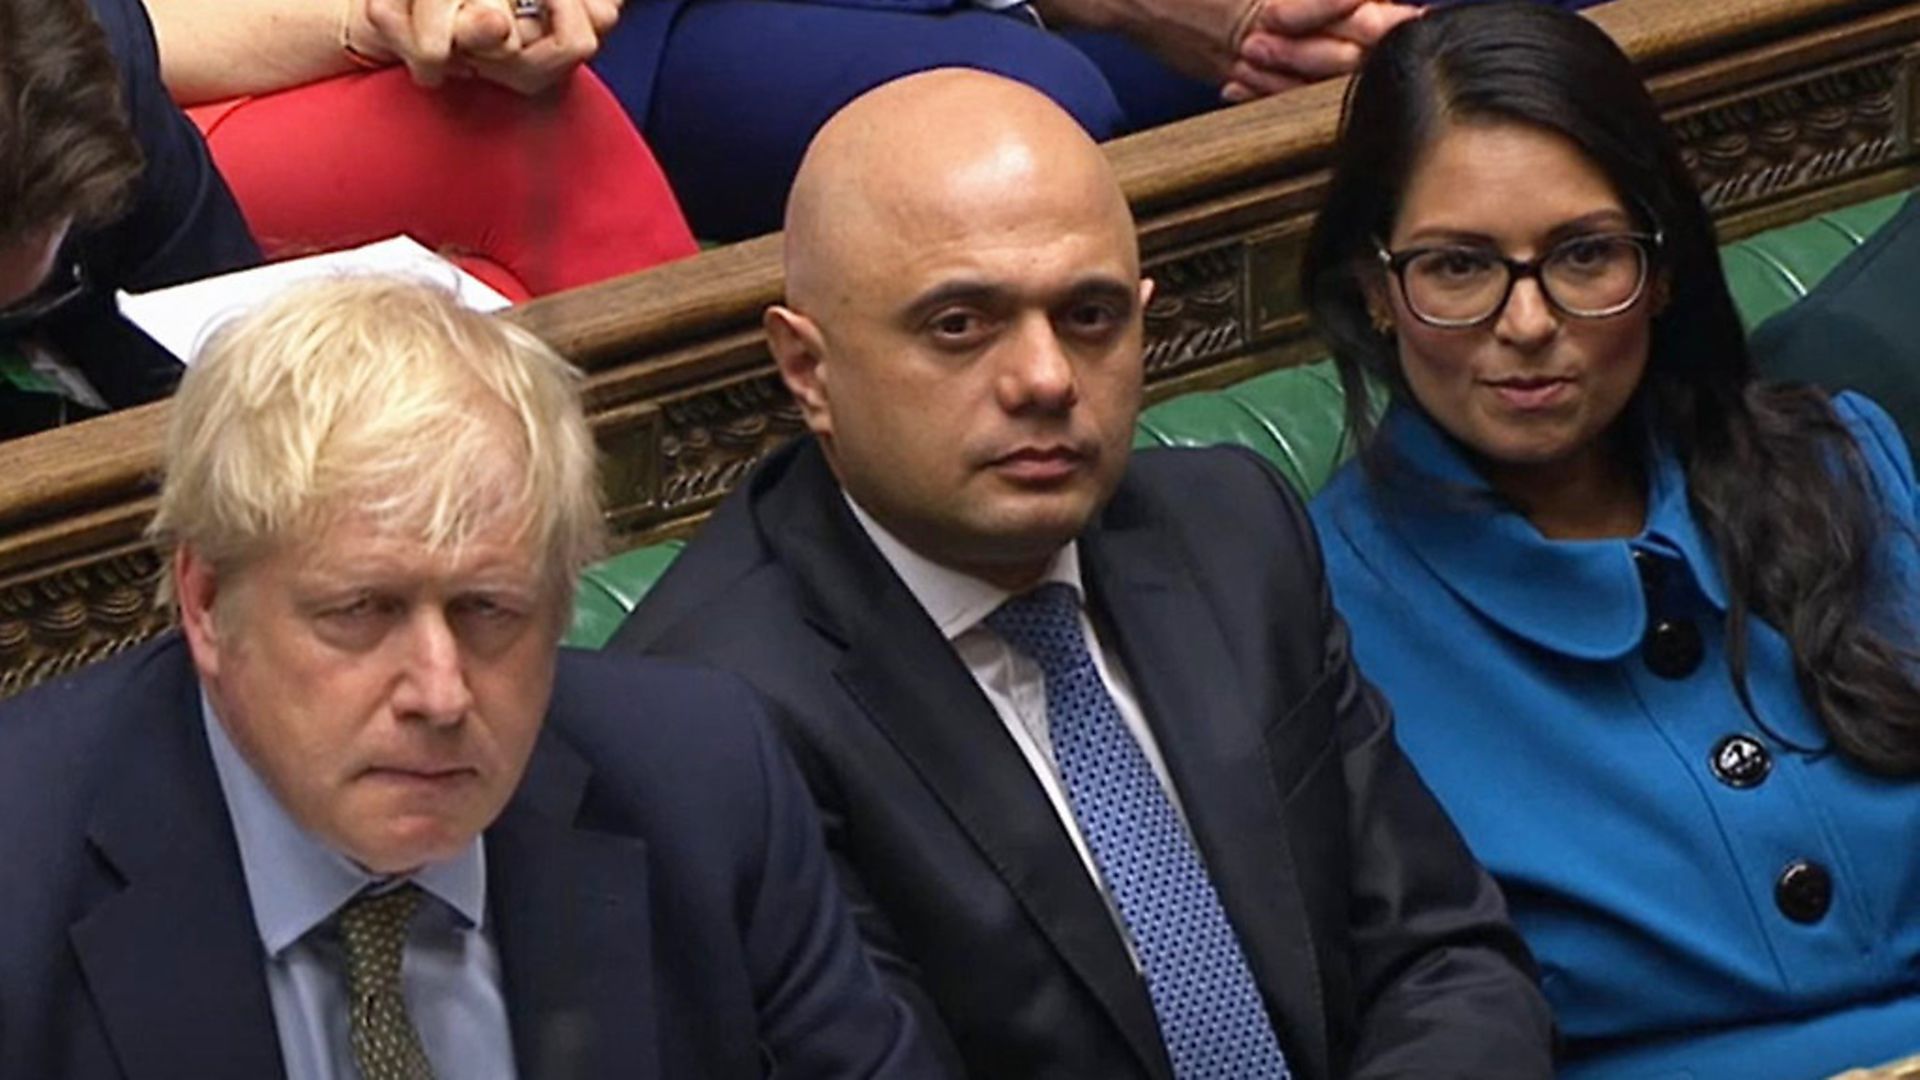 Prime minister Boris Johnson, chancellor of the exchequer Sajid Javid and home secretary Priti Patel. Photograph: House of Commons/PA. - Credit: PA Wire/PA Images